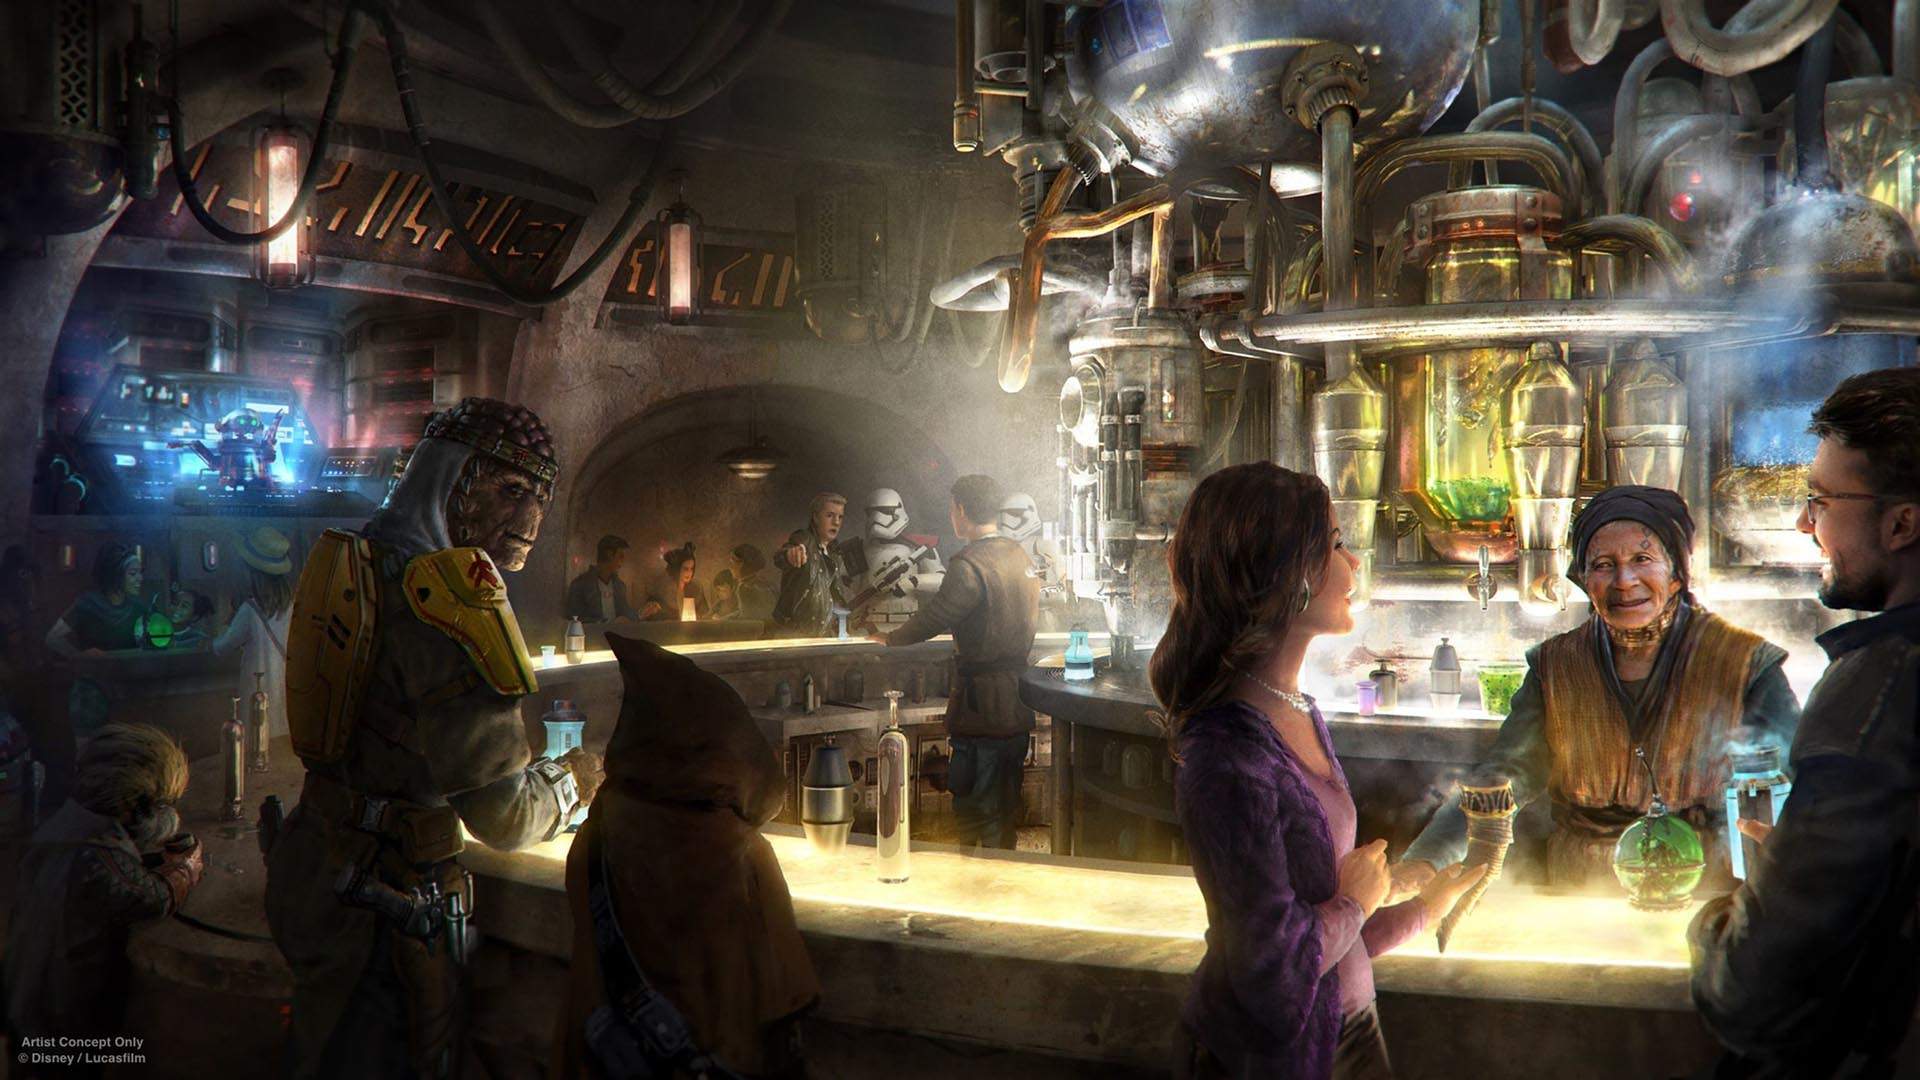 You'll Soon Be Able to Drink Like You're In a Galaxy Far, Far Away at a Boozy 'Star Wars' Cantina